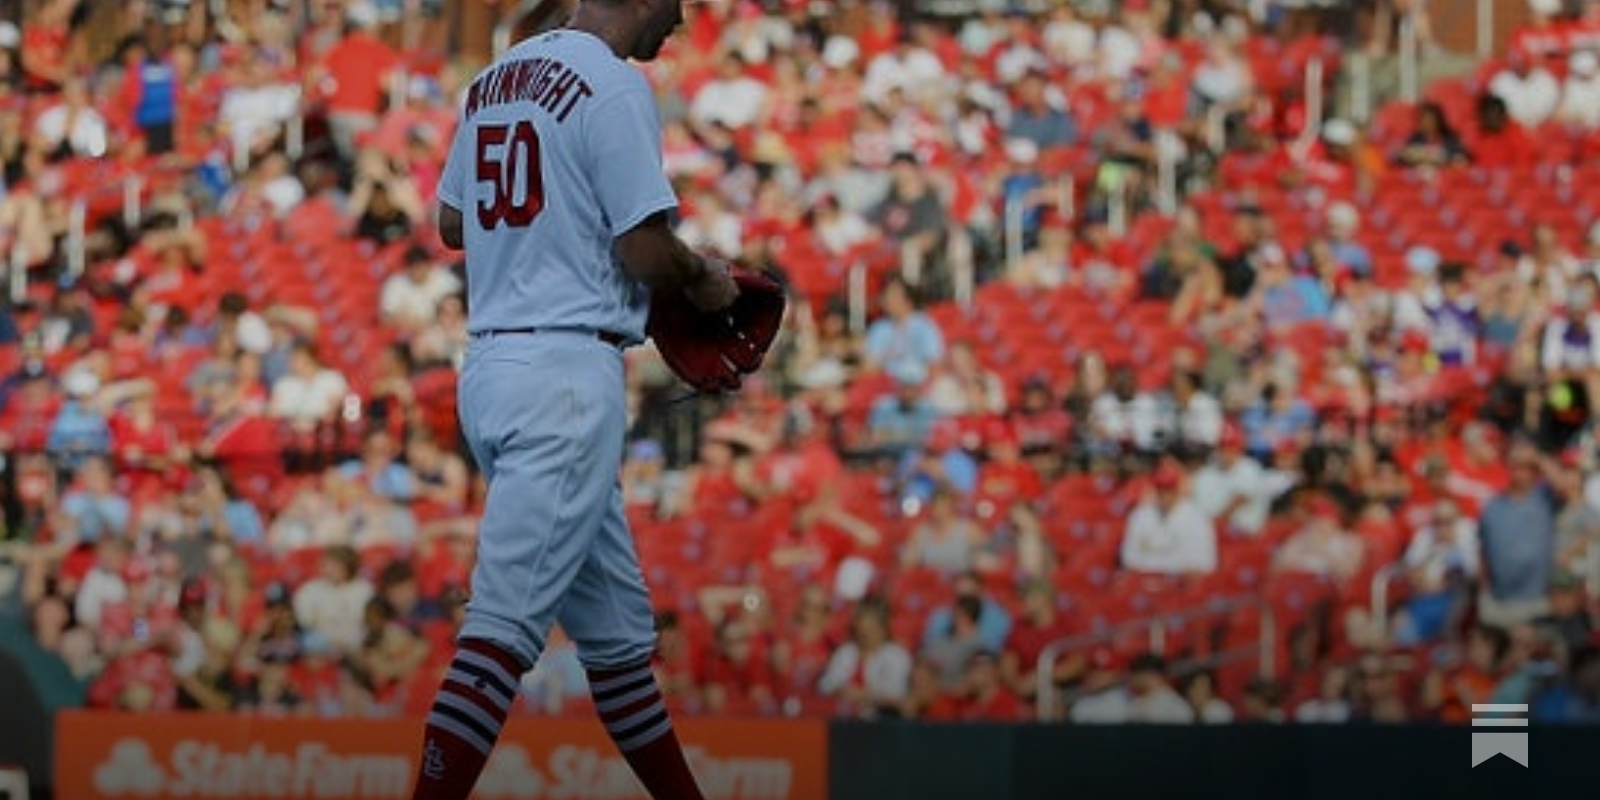 Adam Wainwright talks retirement timeline with The Athletic